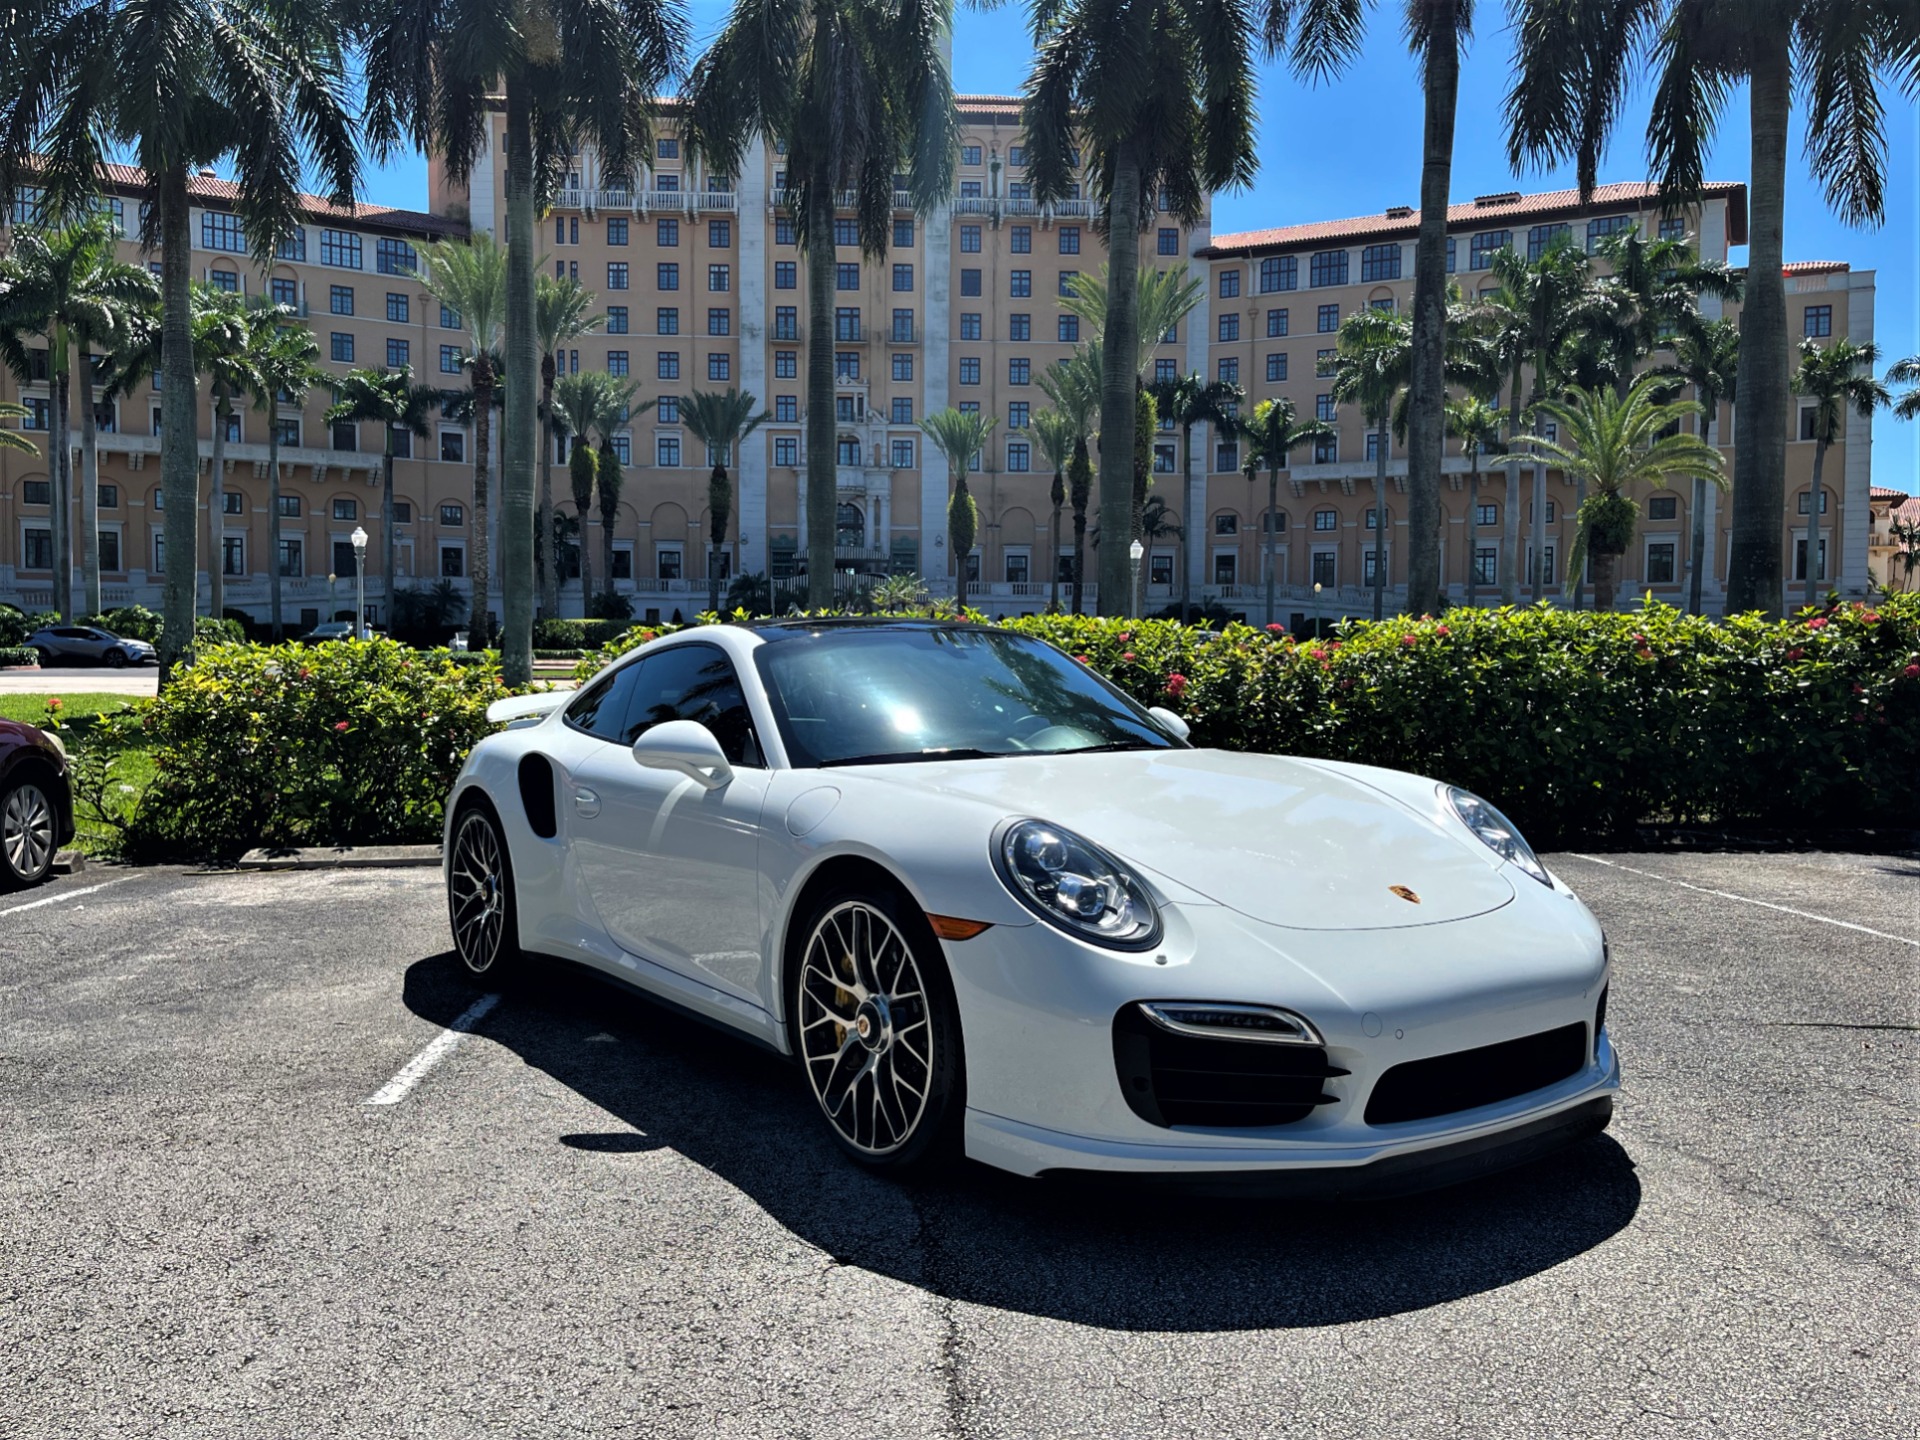 Used 2014 Porsche 911 Turbo S for sale $125,850 at The Gables Sports Cars in Miami FL 33146 1